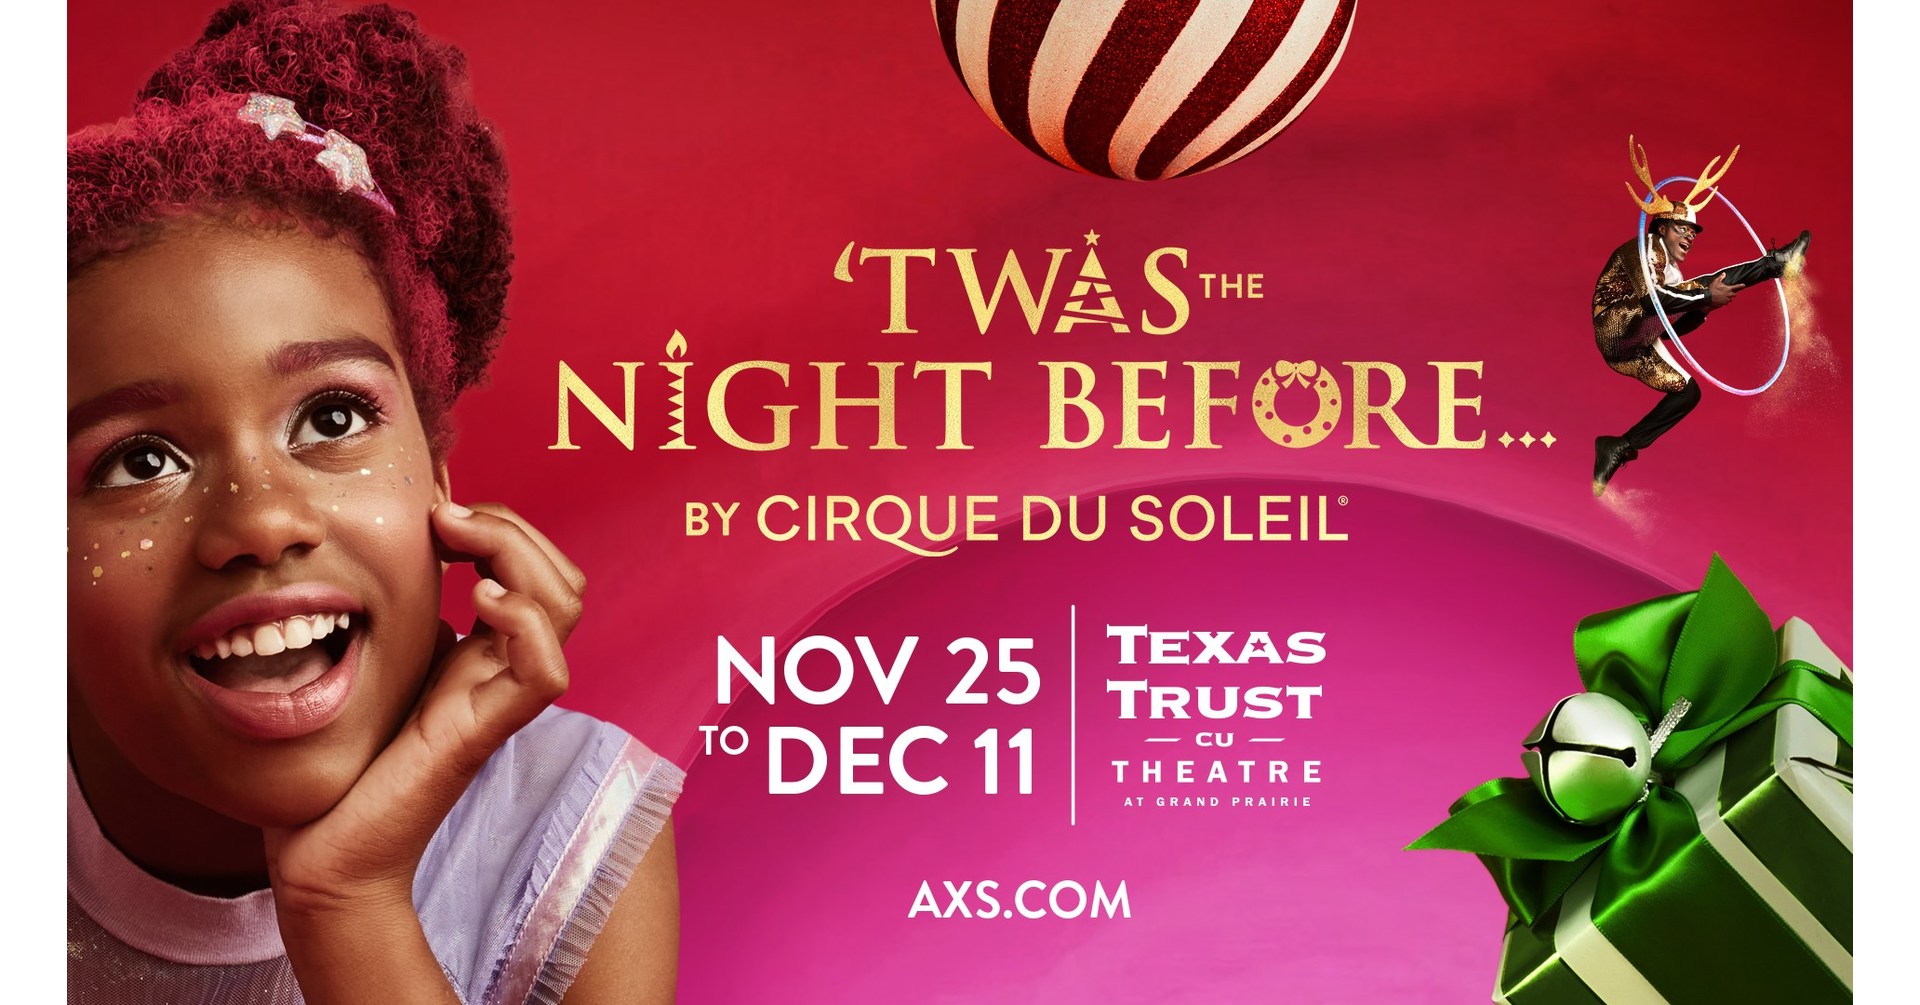 Twas The Night Before By Cirque du Soleil